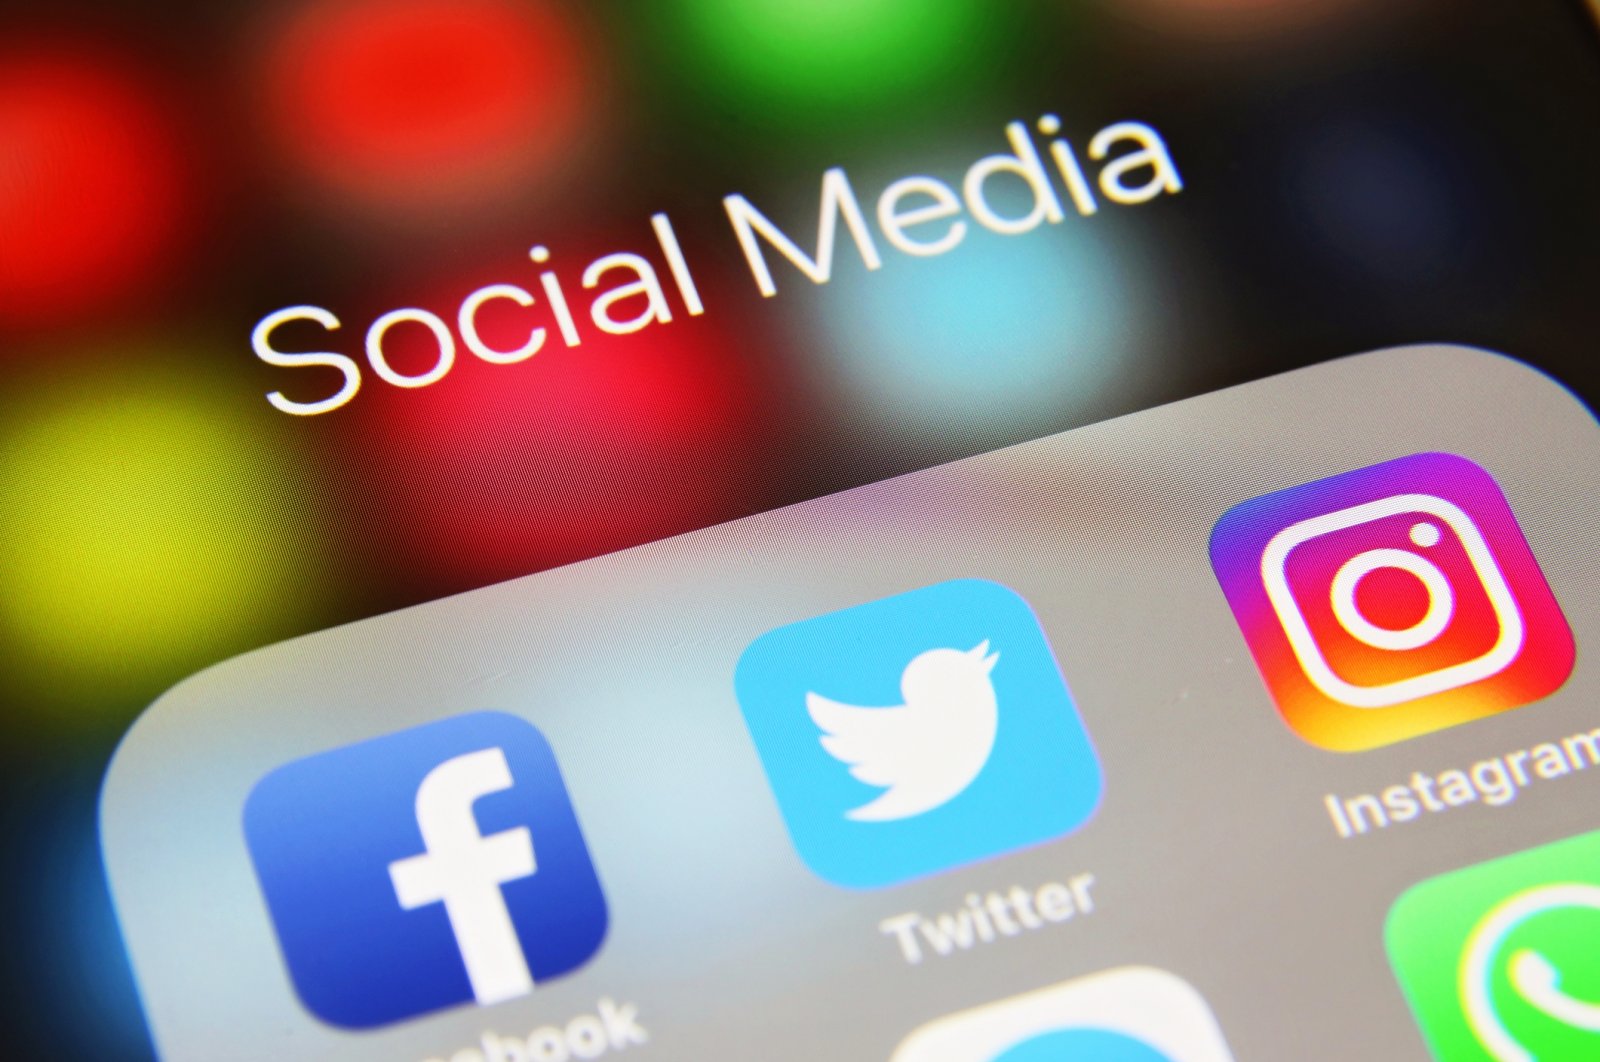 Icons of social media applications such as Facebook, Twitter and Instagram are seen on a screen of a mobile phone, London, U.K., June 2, 2019. (iStock Photo)